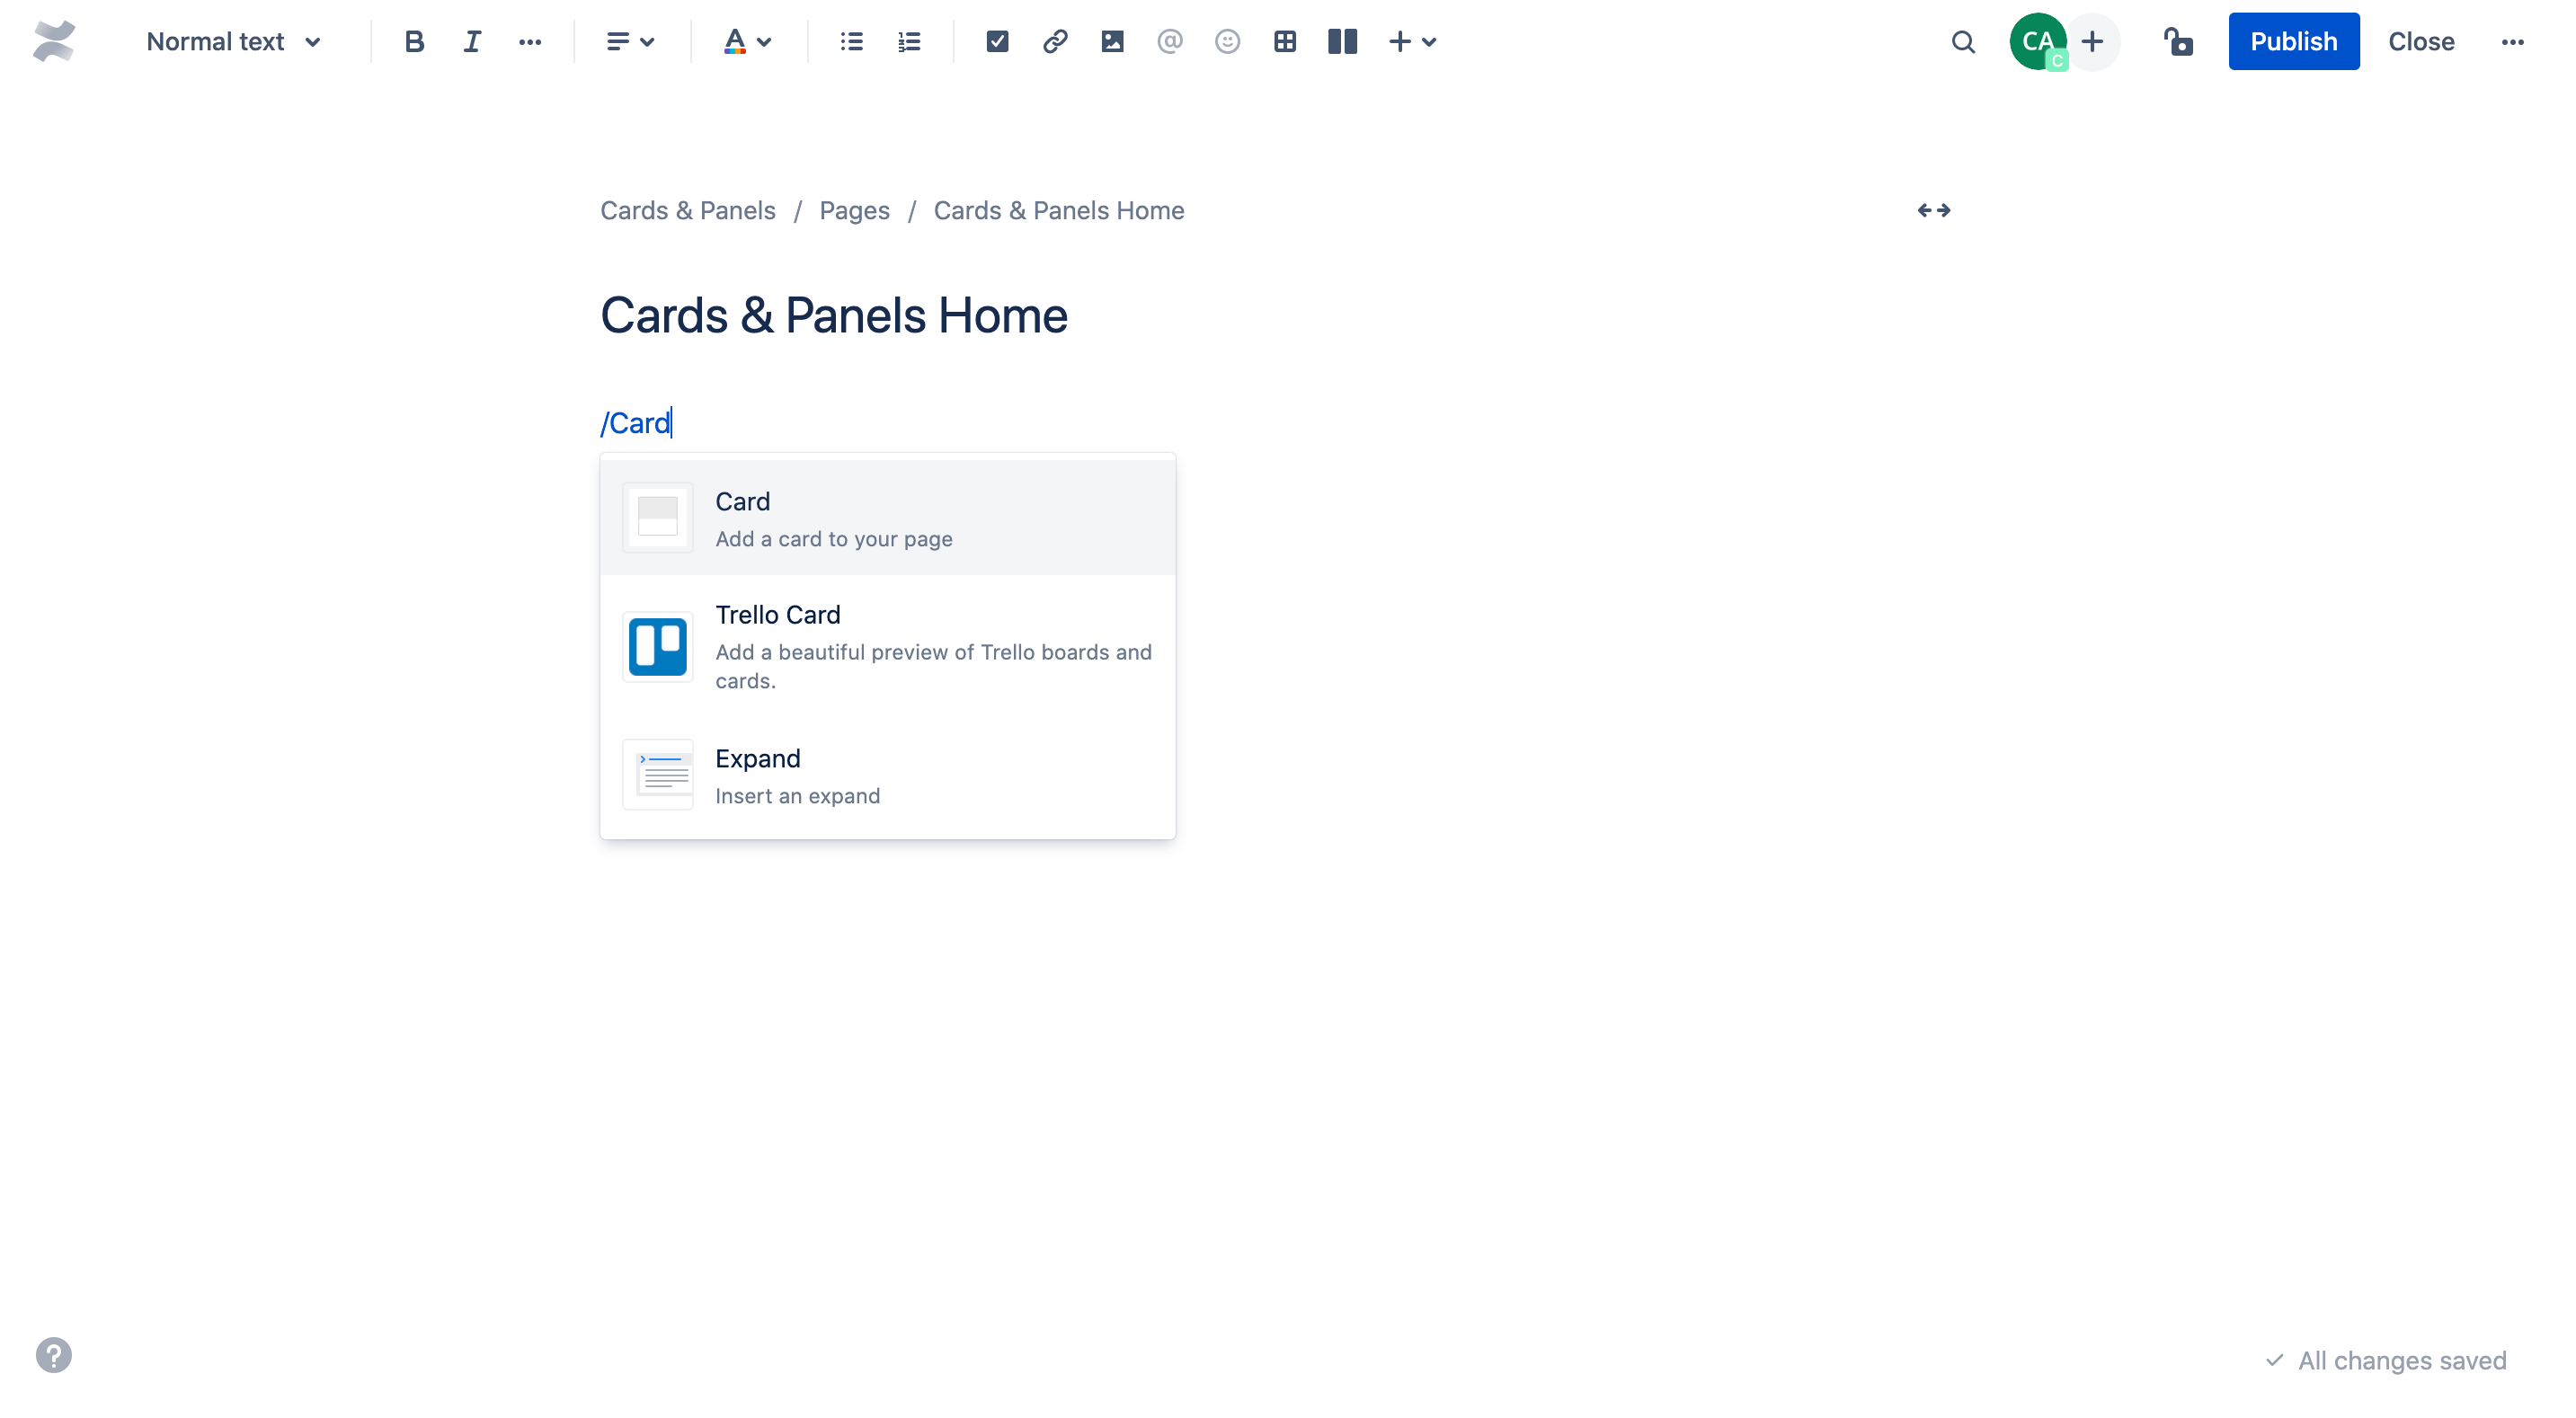 Adding the Card macro in the Confluence editor.